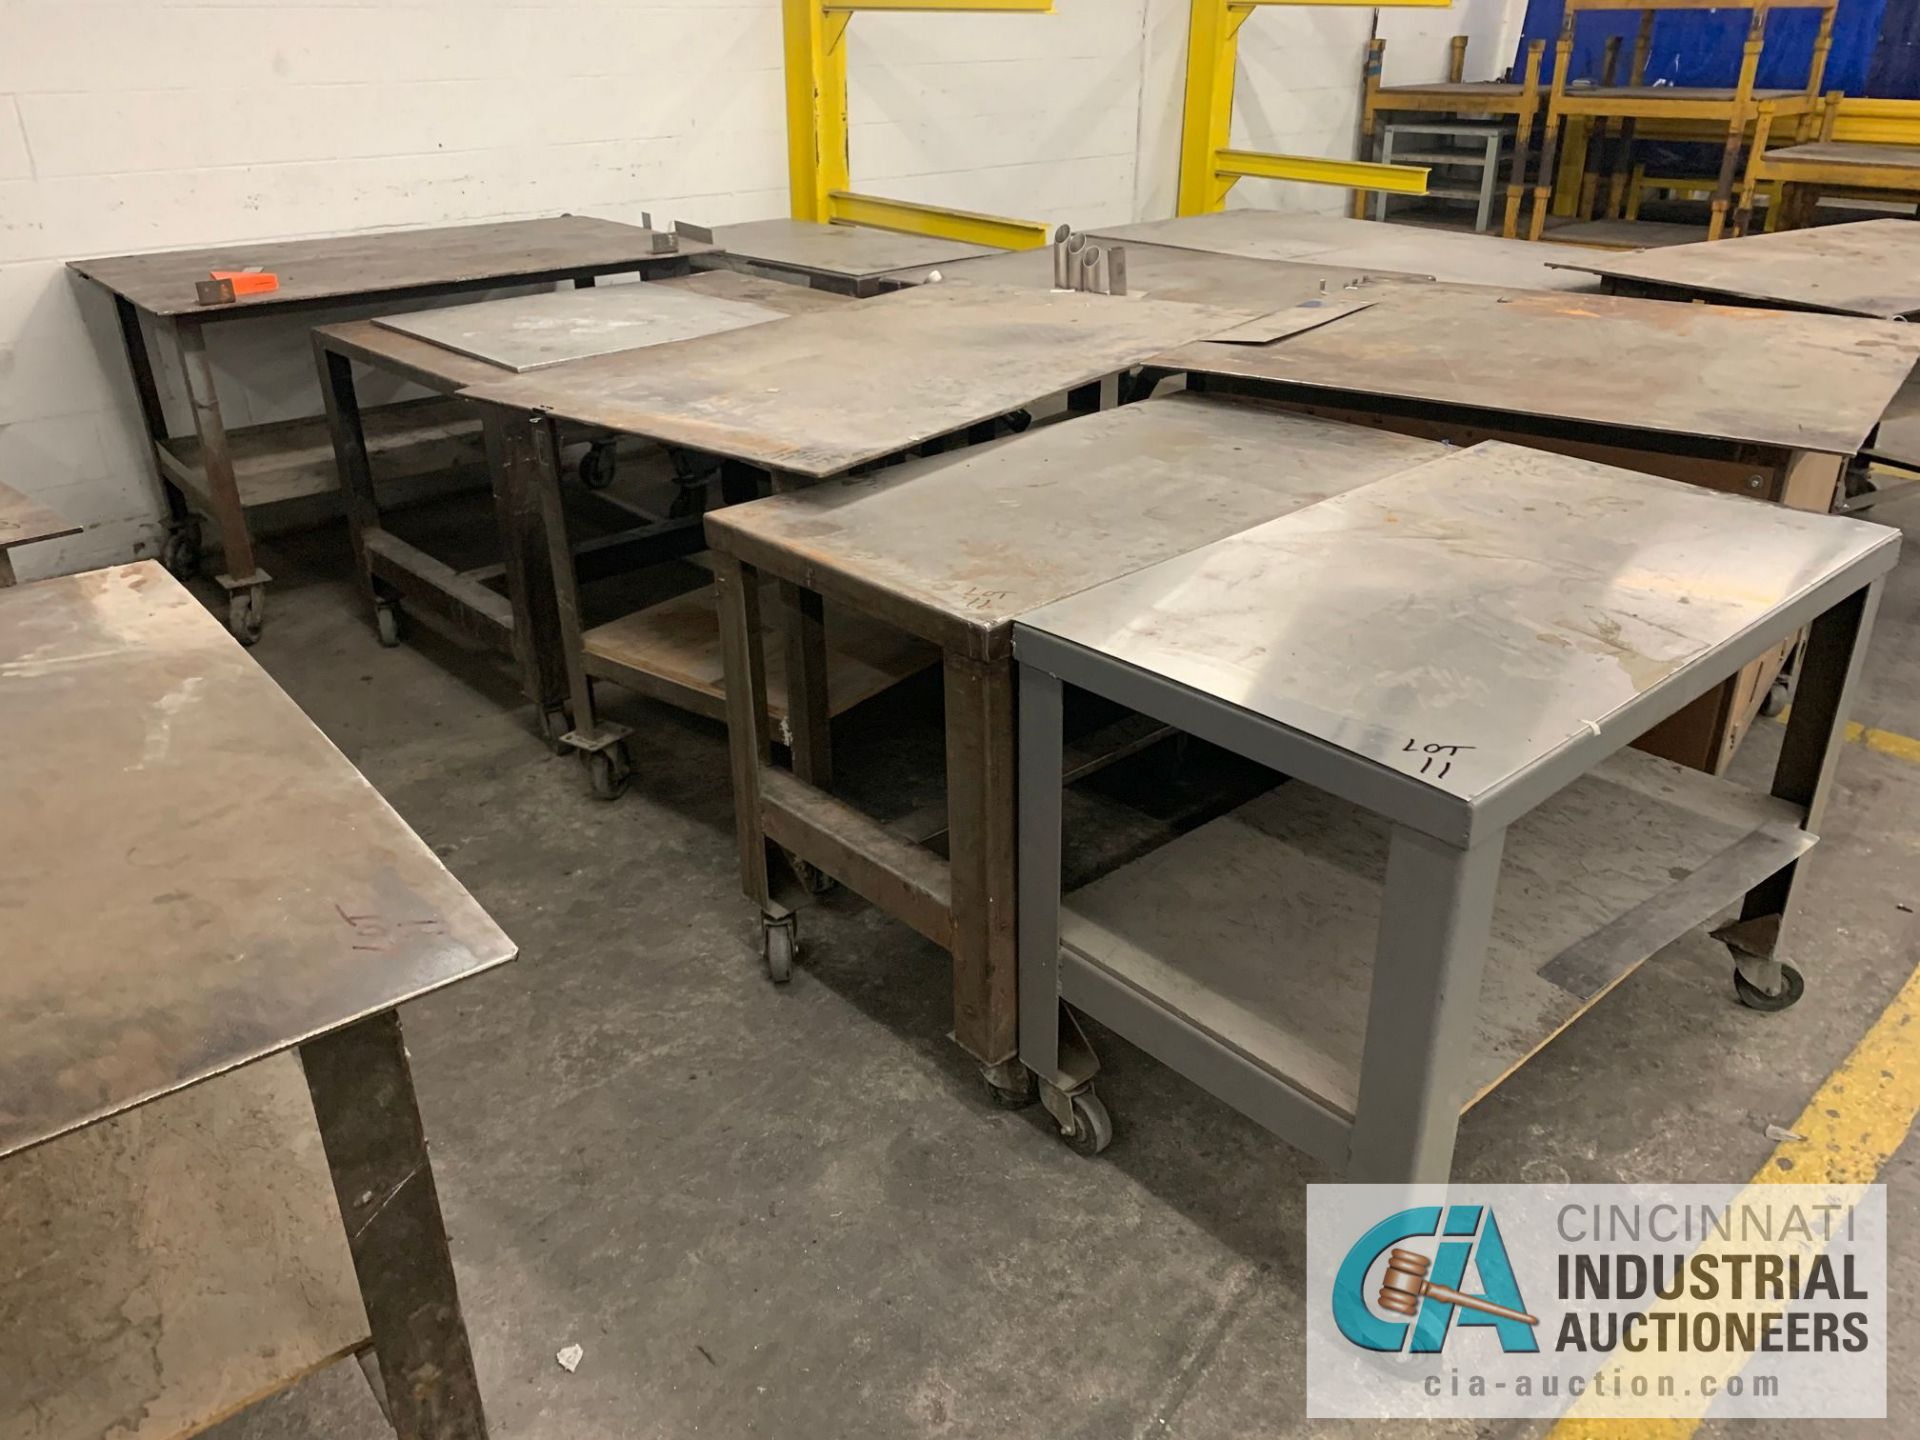 VARIOUS HEAVY DUTY CARTS, SOME SET-UP TO BE HEAVY WELD TABLES - Image 3 of 5